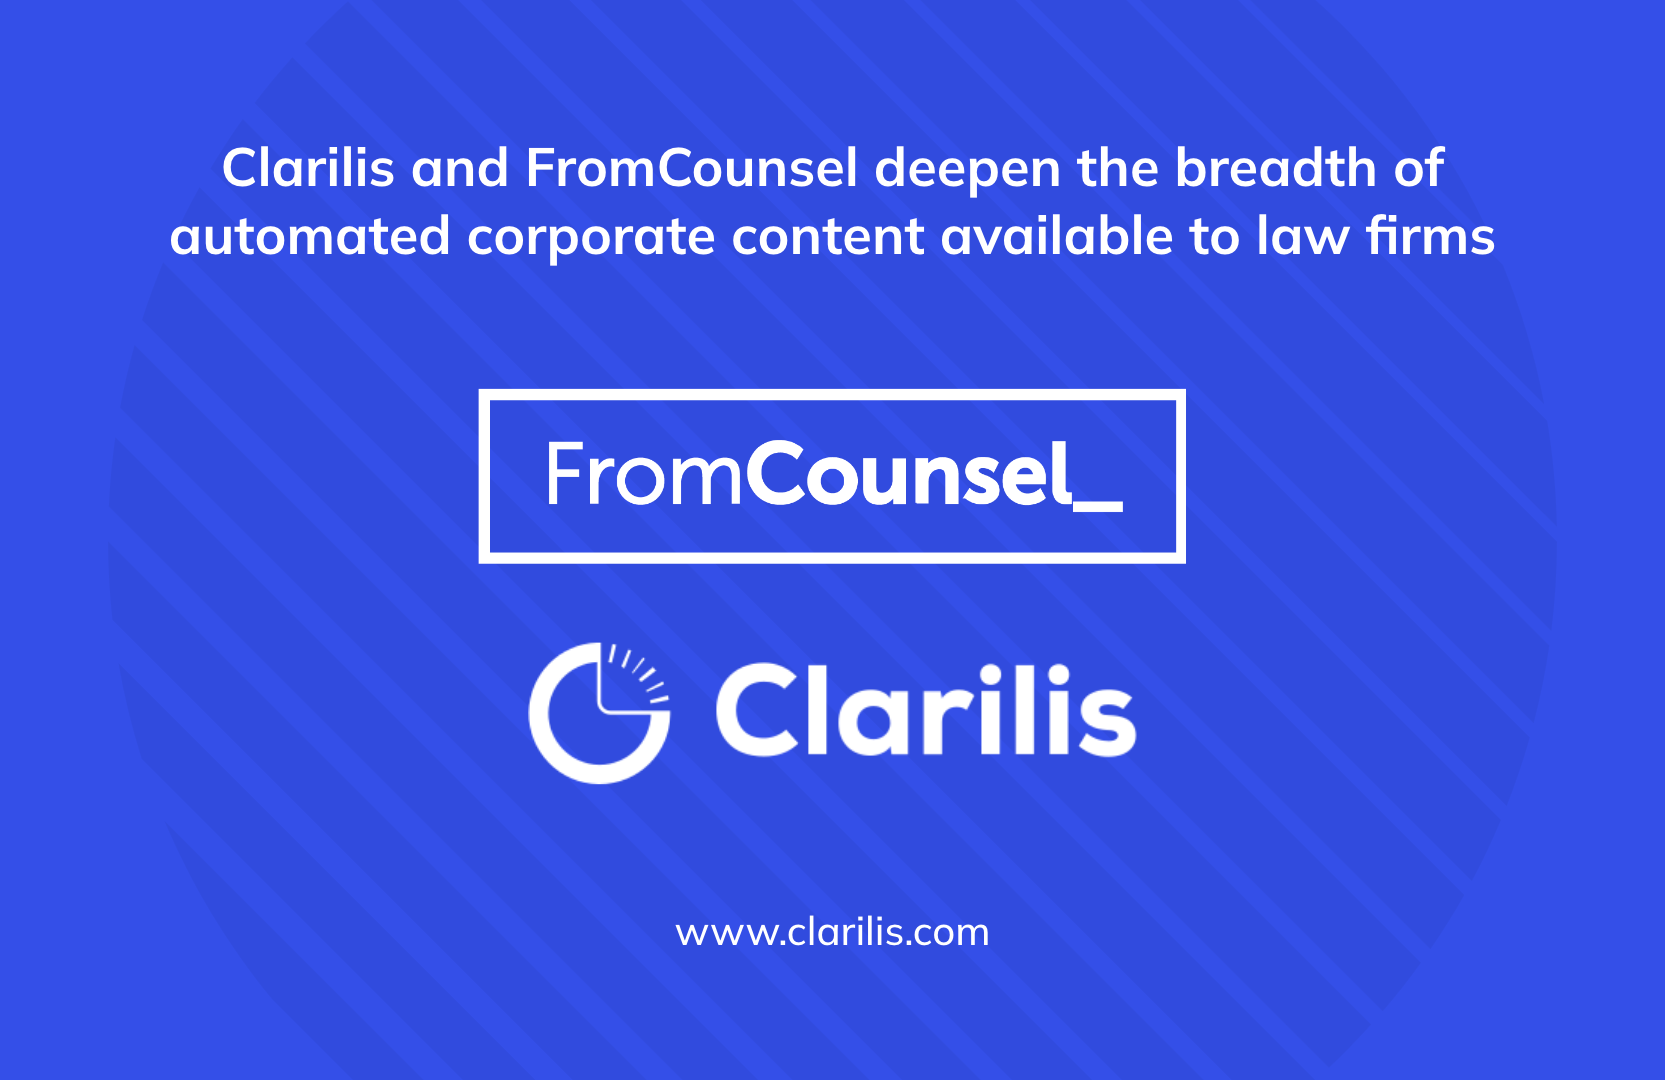 Clarilis and FromCounsel have announced the next phase of their partnership